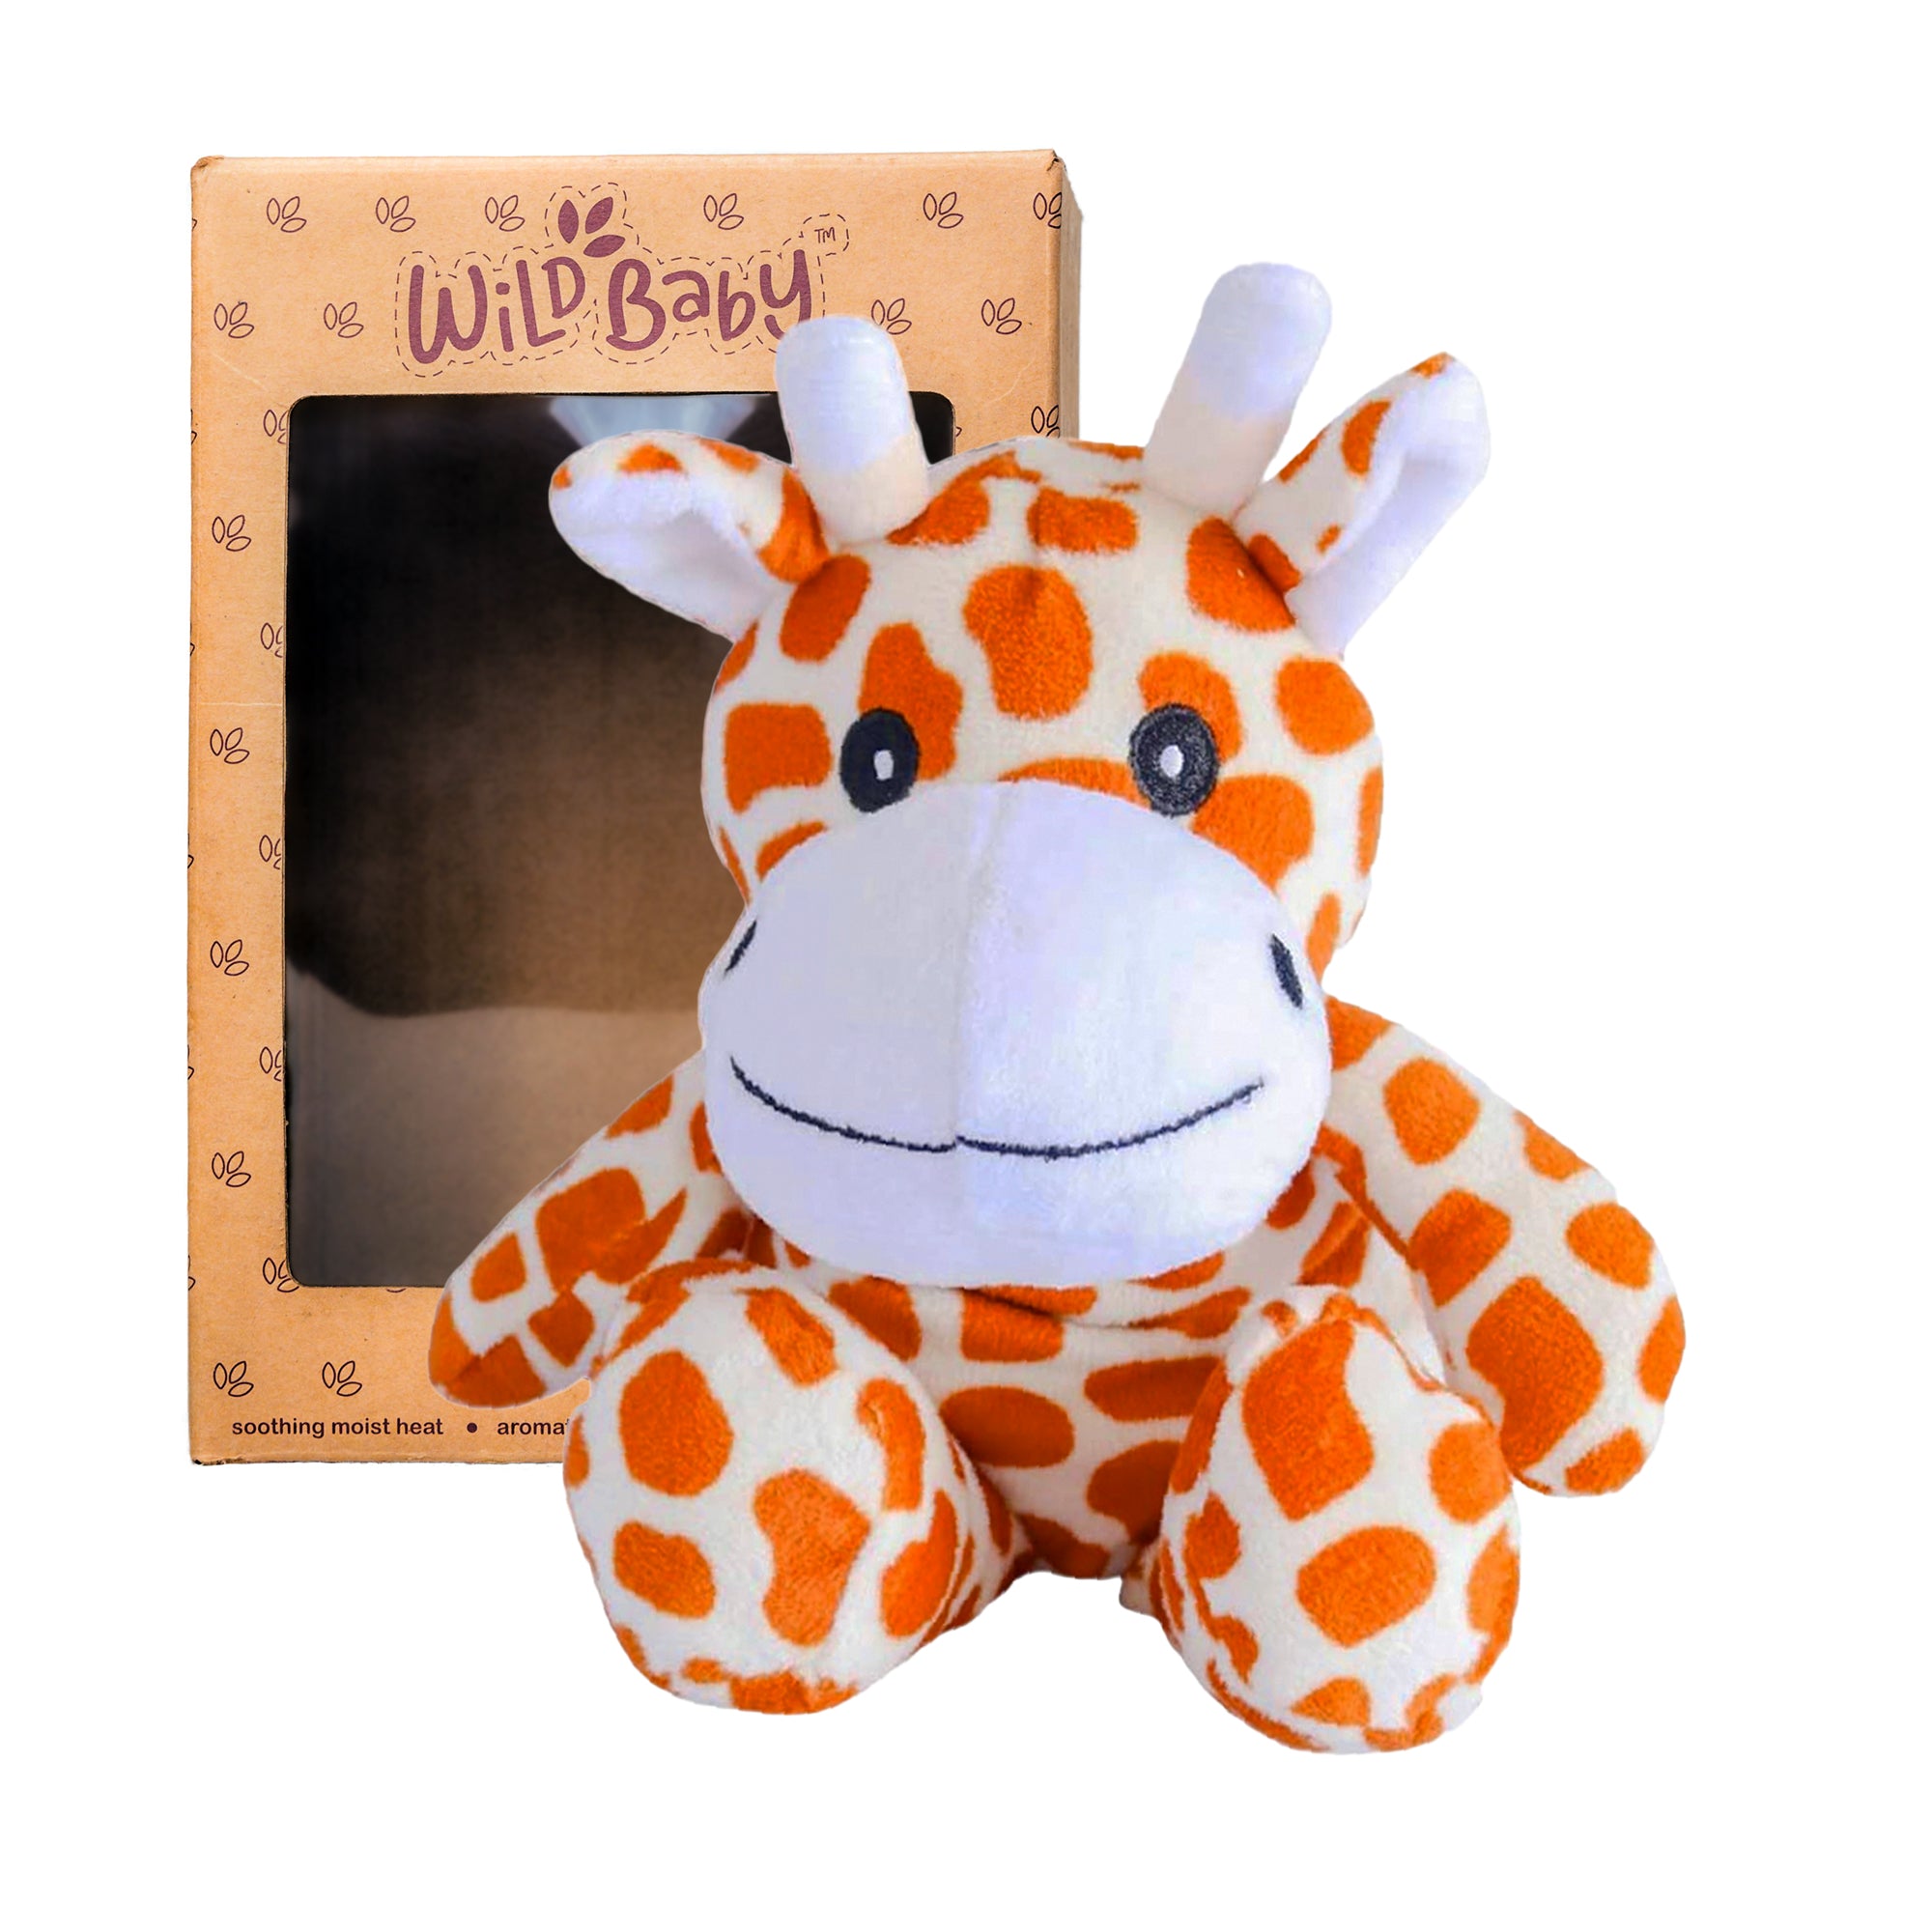 Giraffe Stuffed Animal - Microwaveable Plush Toy with Hot Cold Pack - Wild  Baby